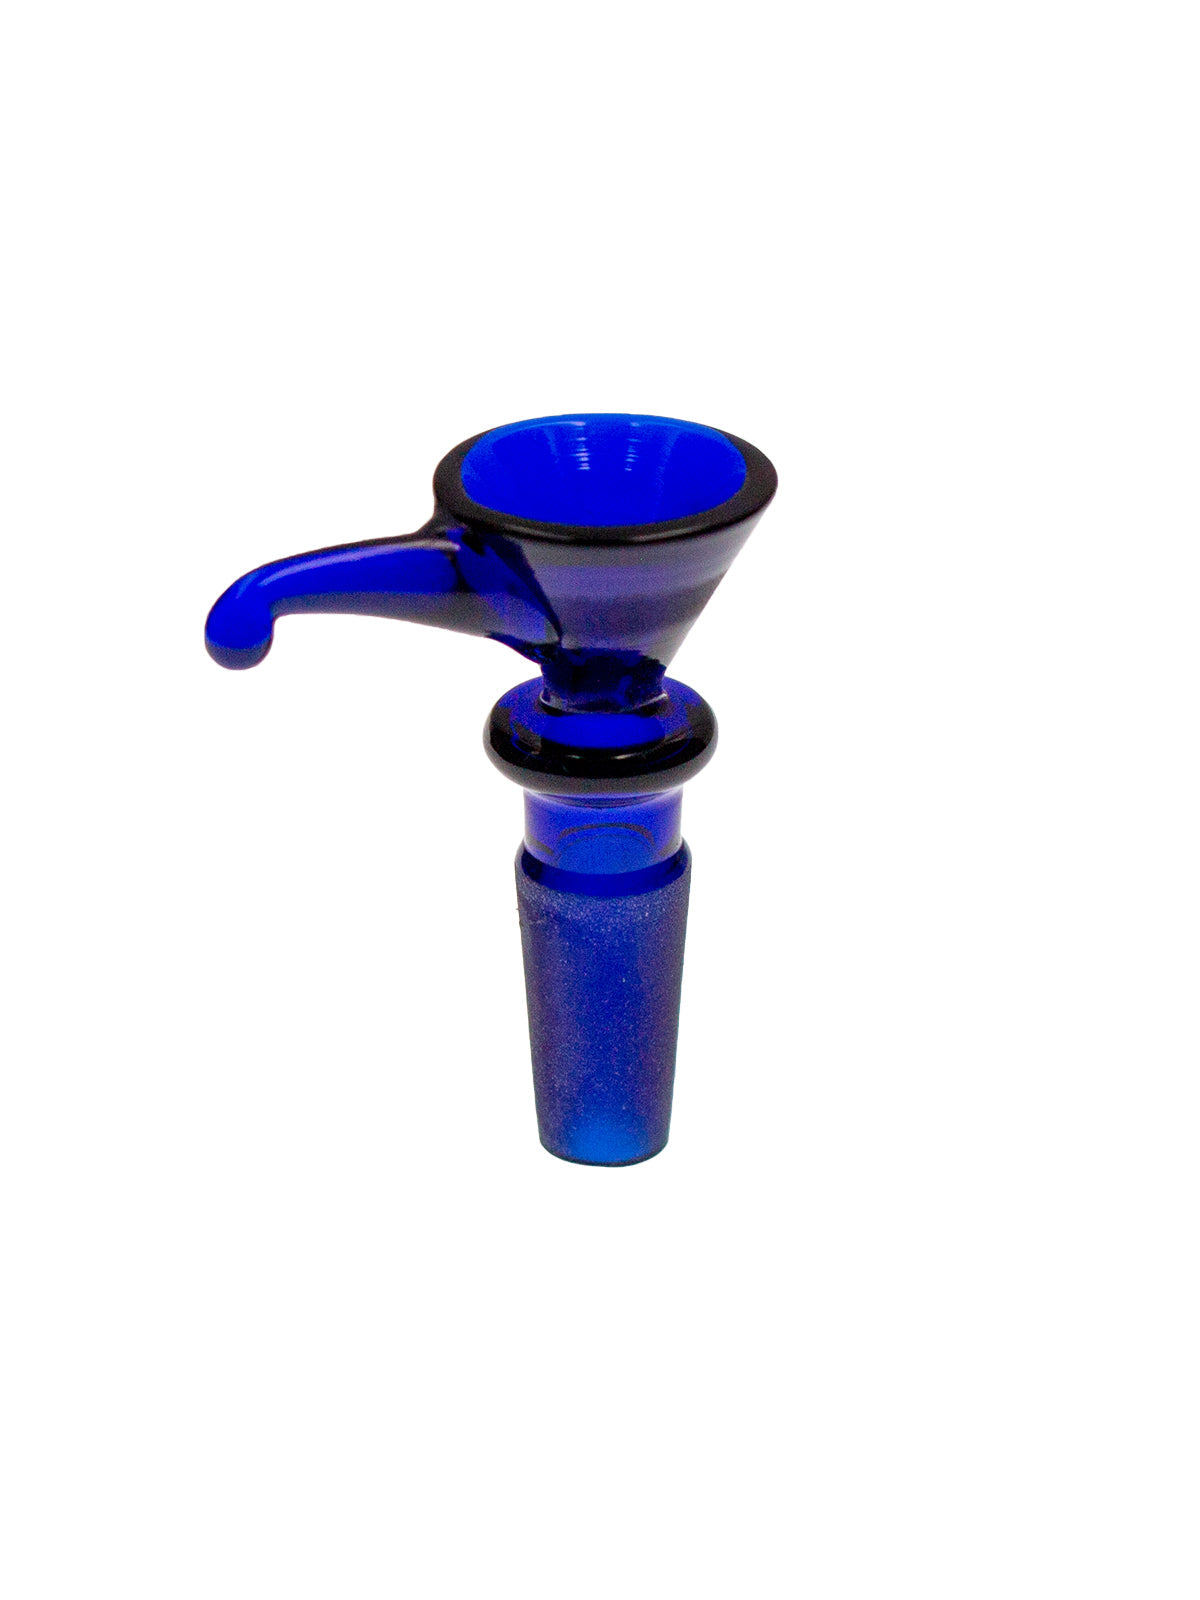 14mm Flower Bowl with Handle | Smokefair